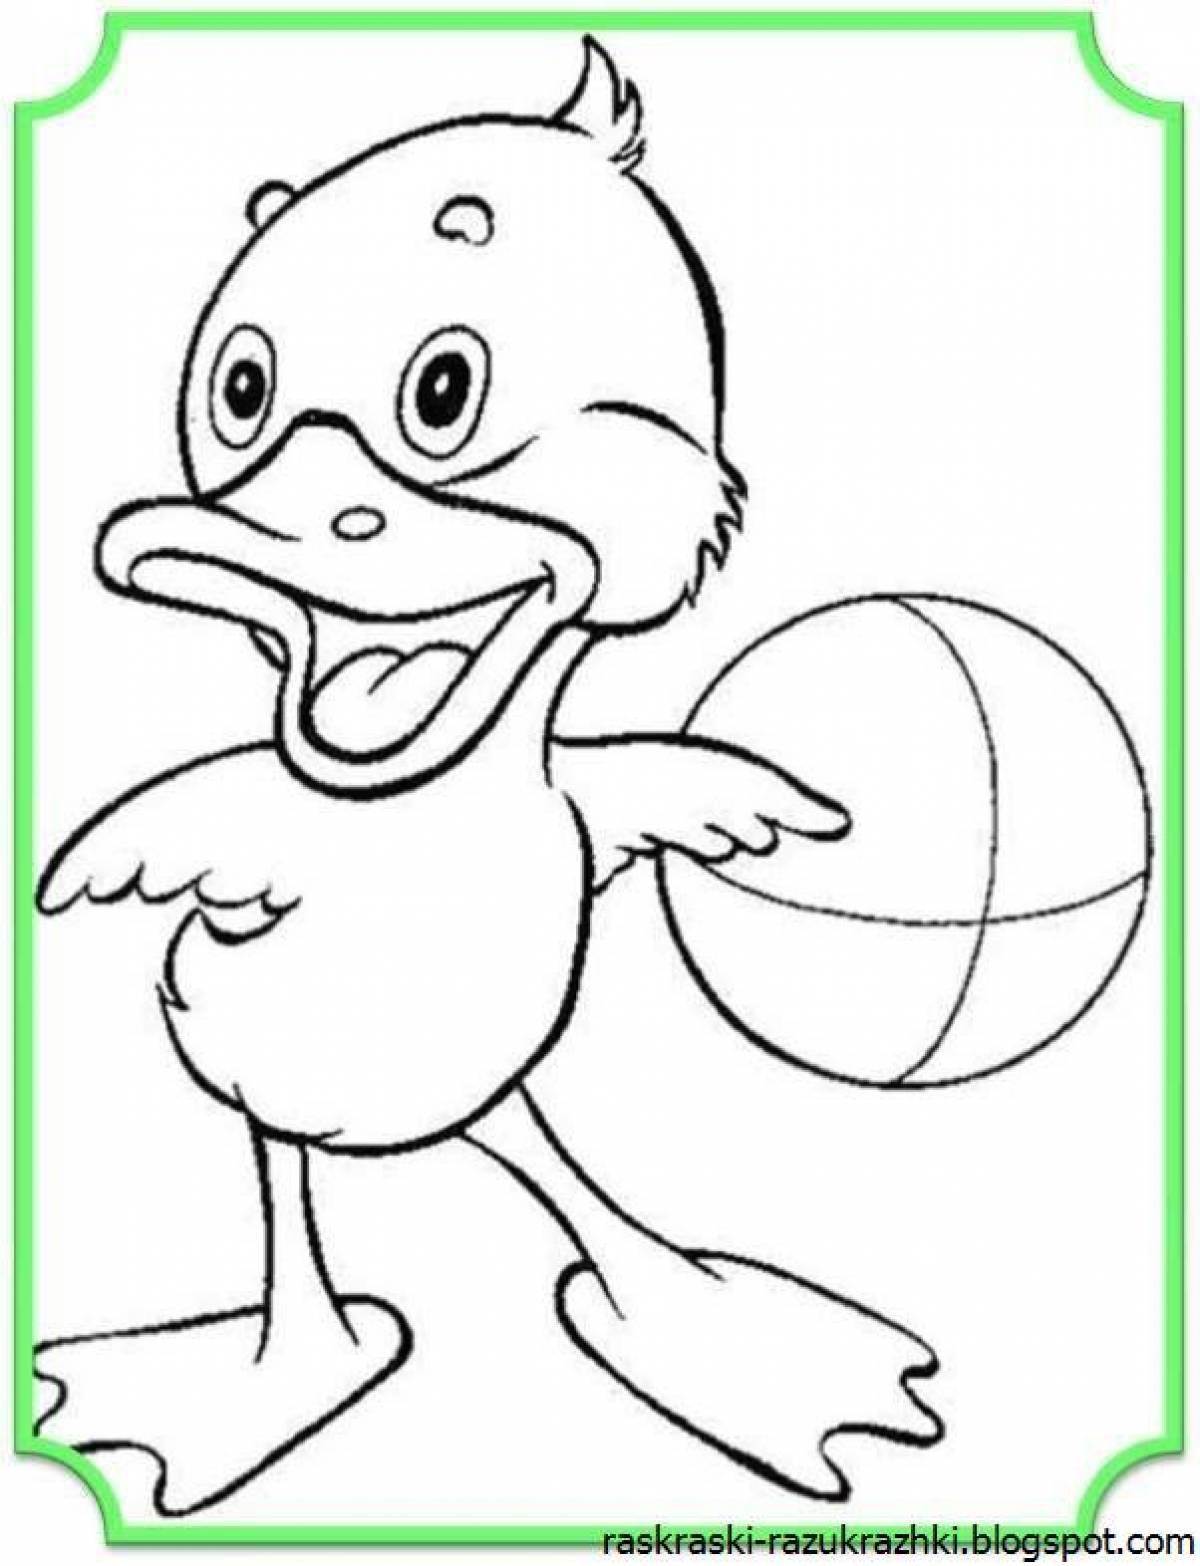 Lalafanfan glowing duck coloring page